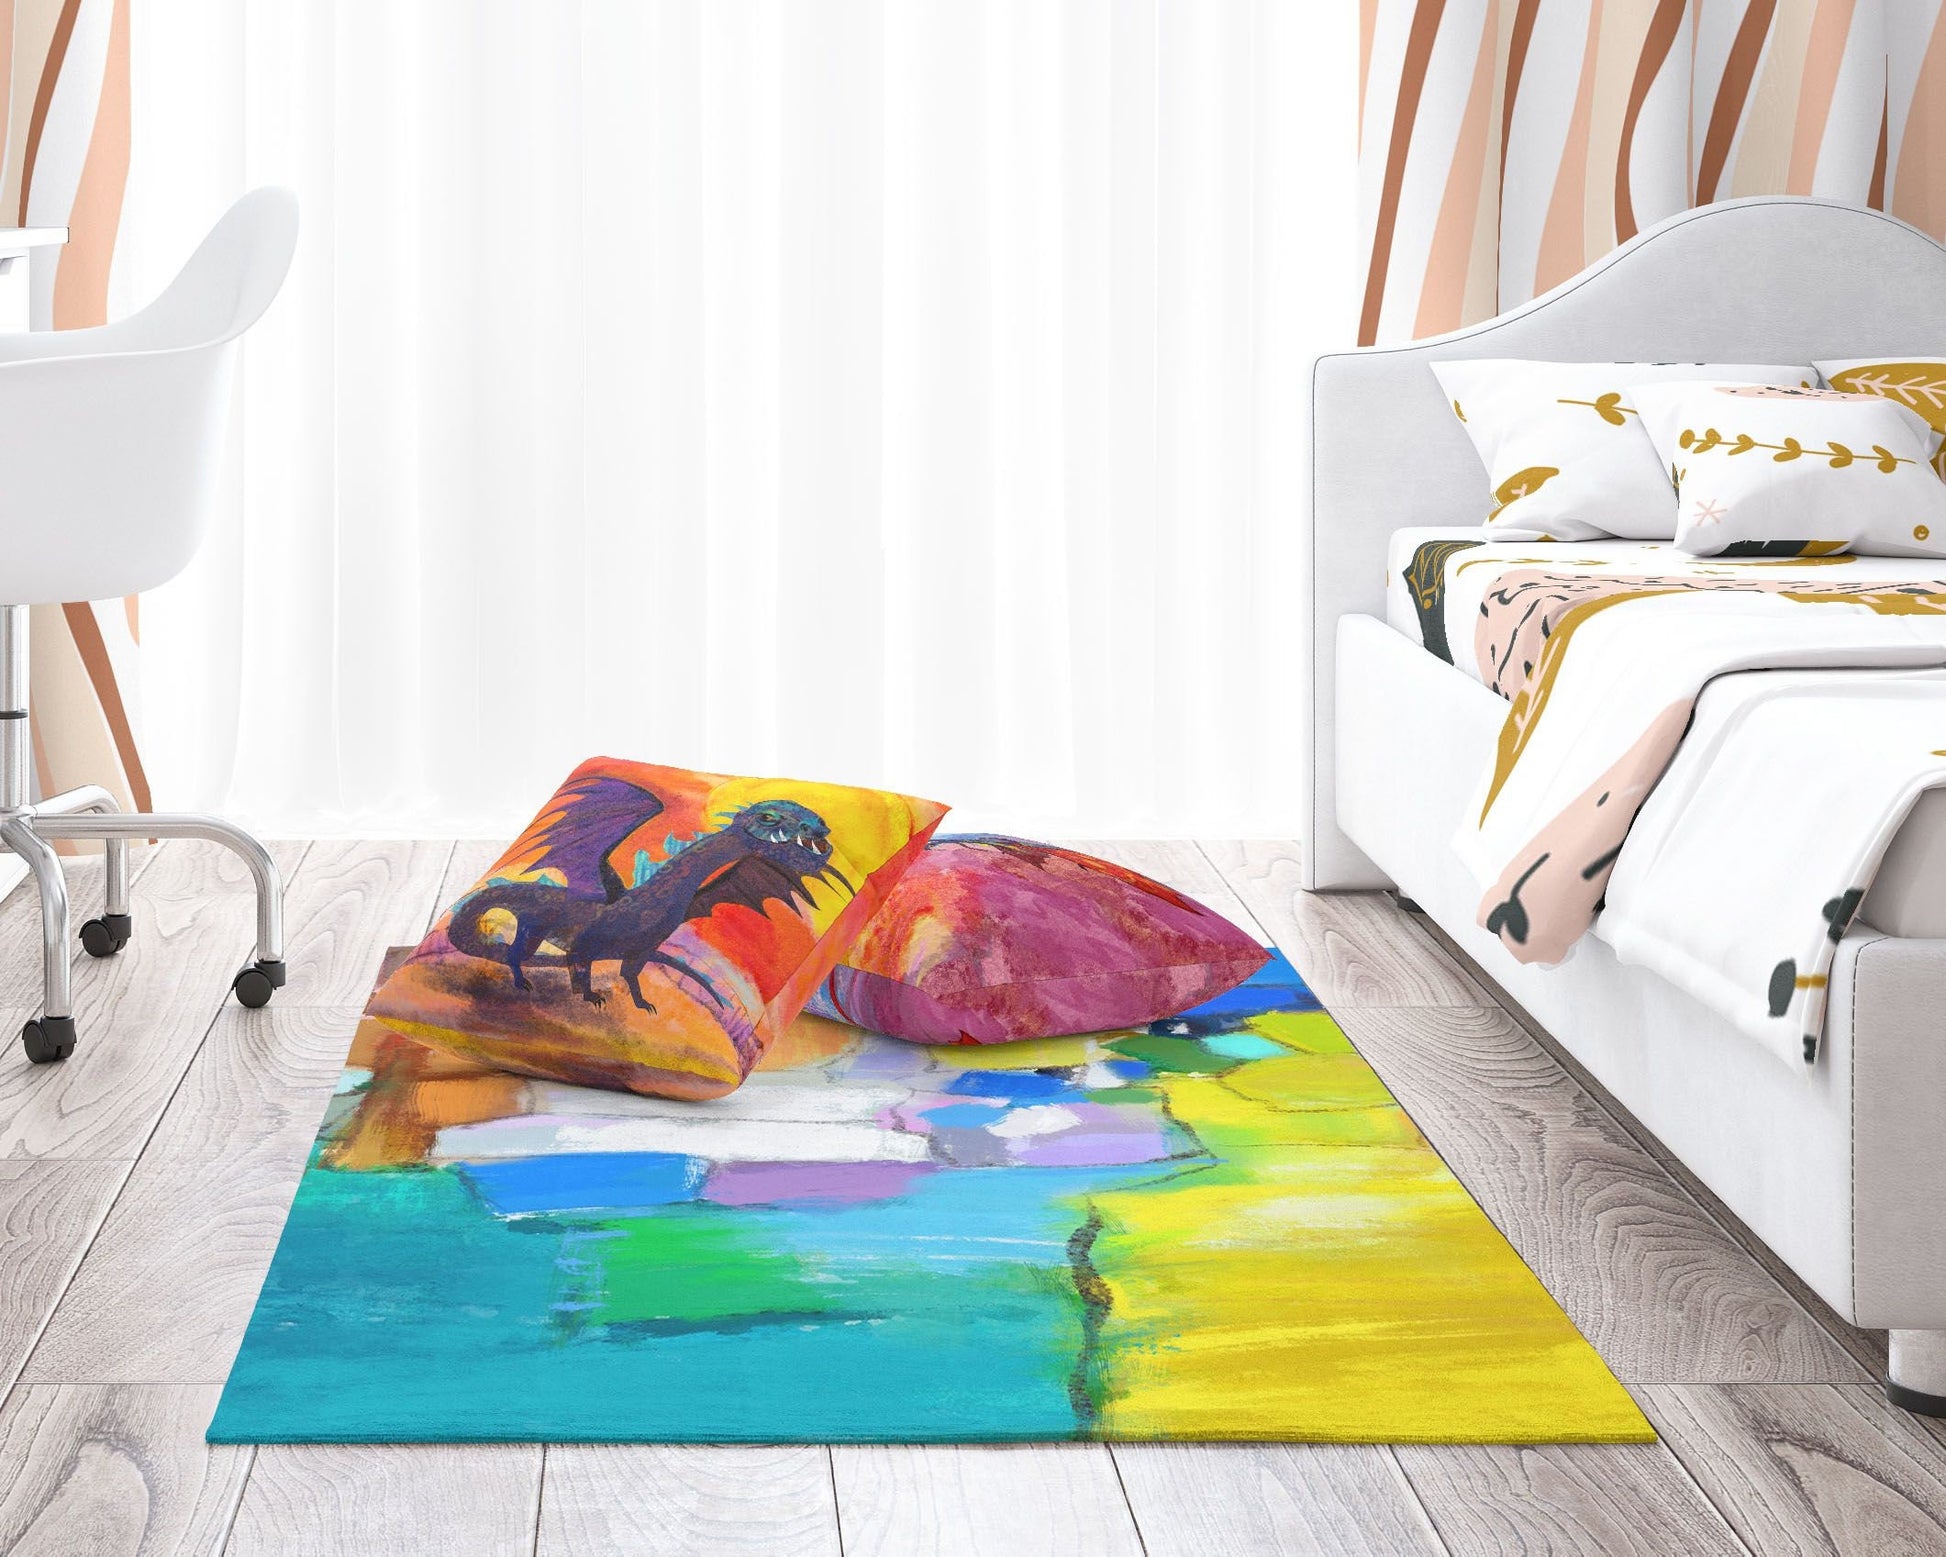 Rugs And Carpet, Large Rug, Thick Carpet, Rectangle Rug, Colorful Rug, Abstract Rug, Stylish Carpet, Home Decor, Made In Usa, Flat Woven Rug